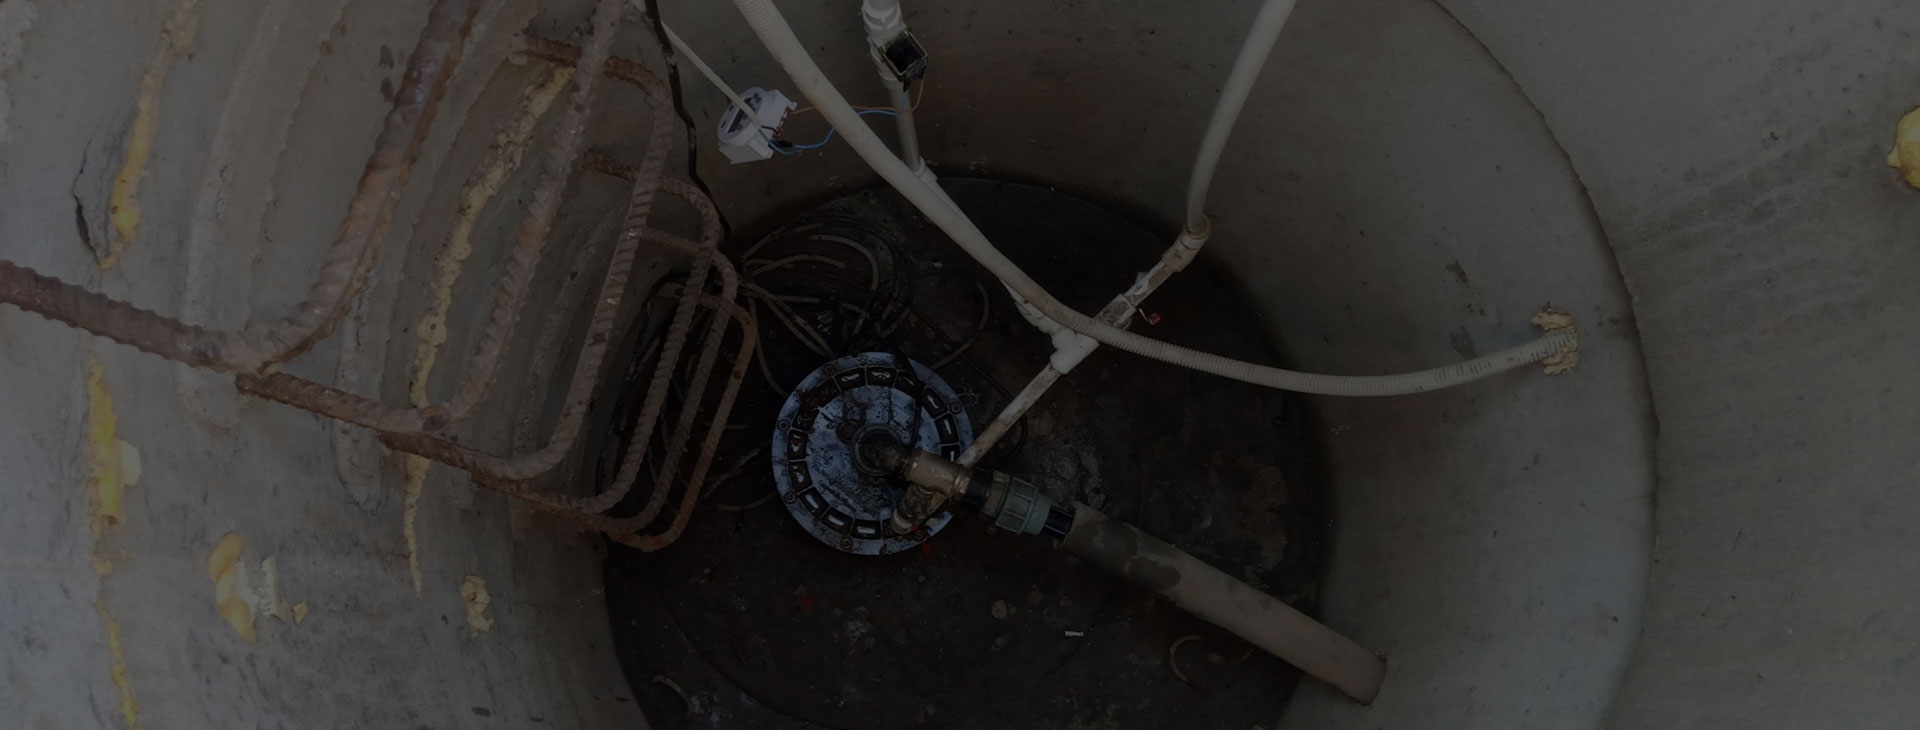 Drainage Cleaning Services Company in Dubai | Clogged Sewer Drain Cleaning